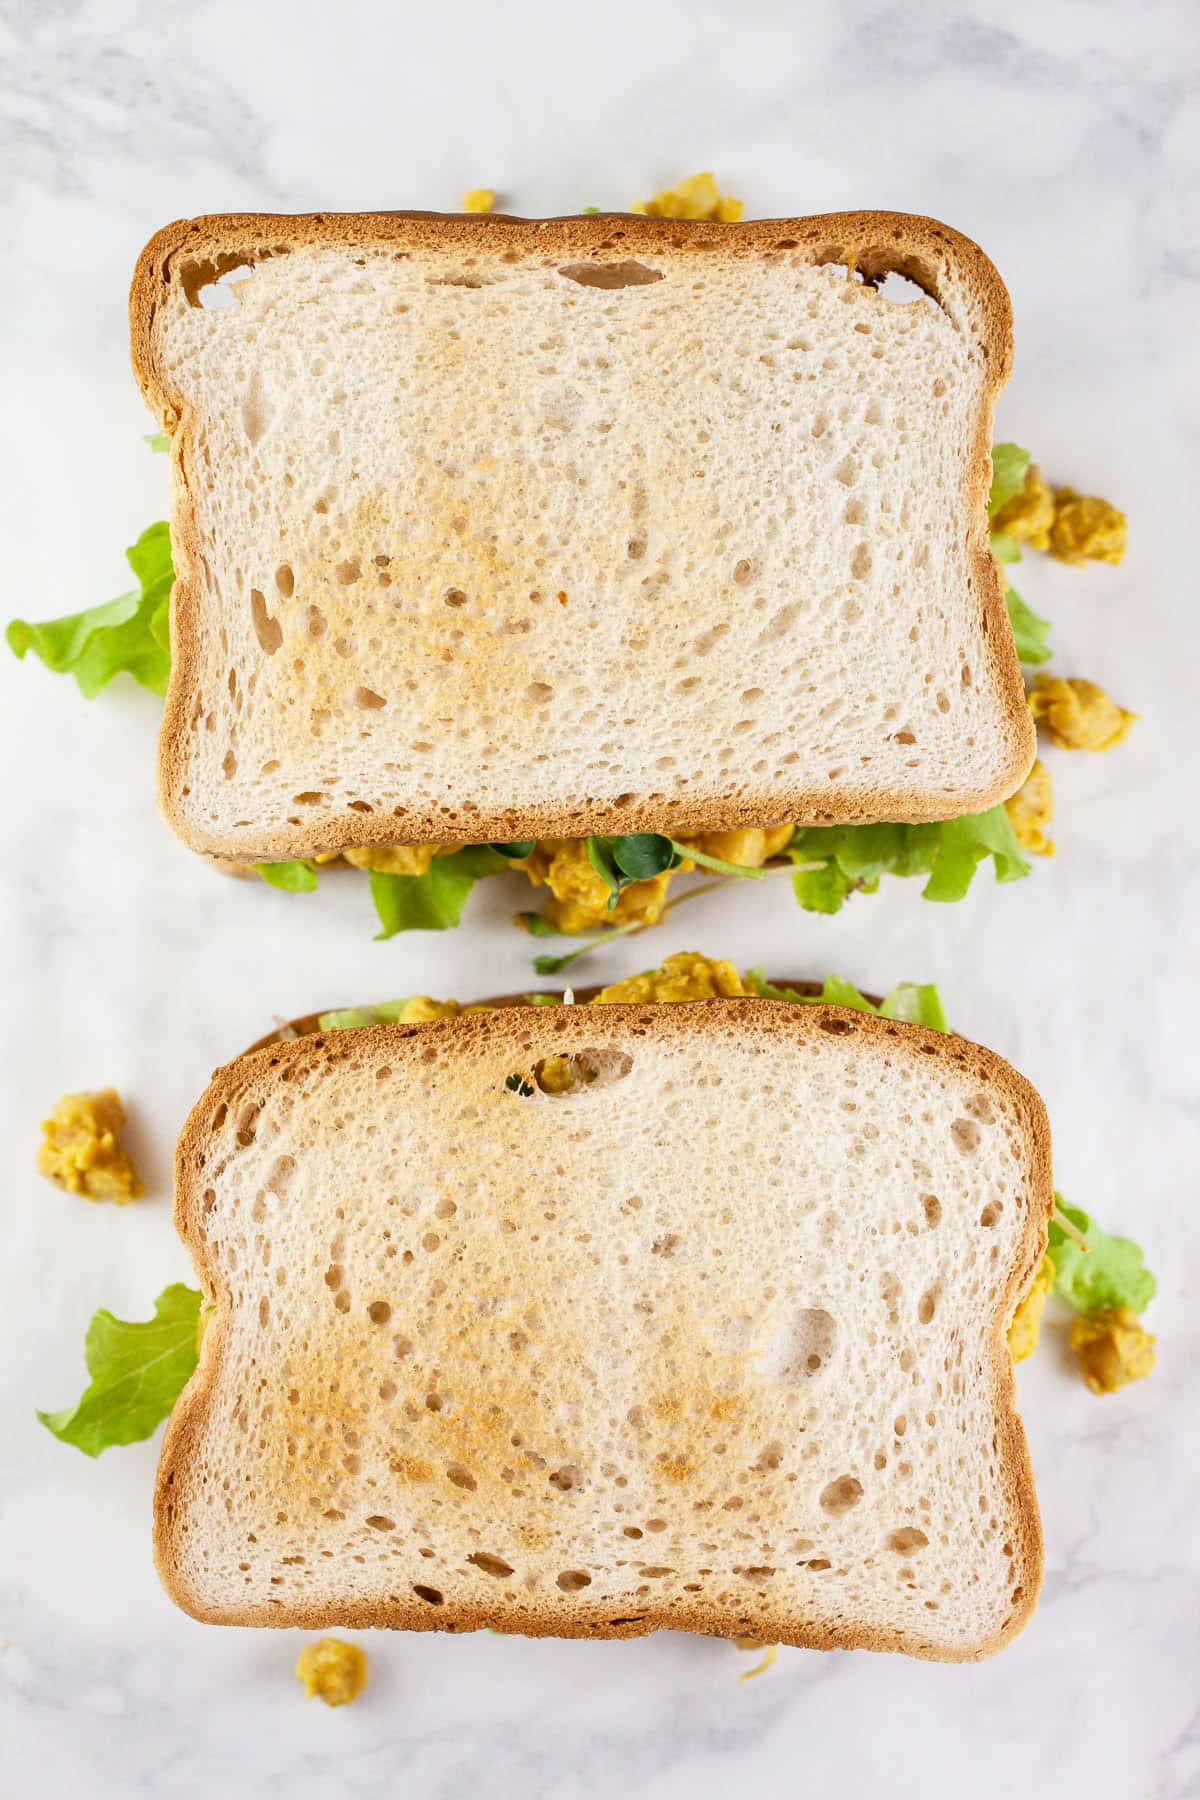 Curried chickpea salad sandwiches with toasted bread.